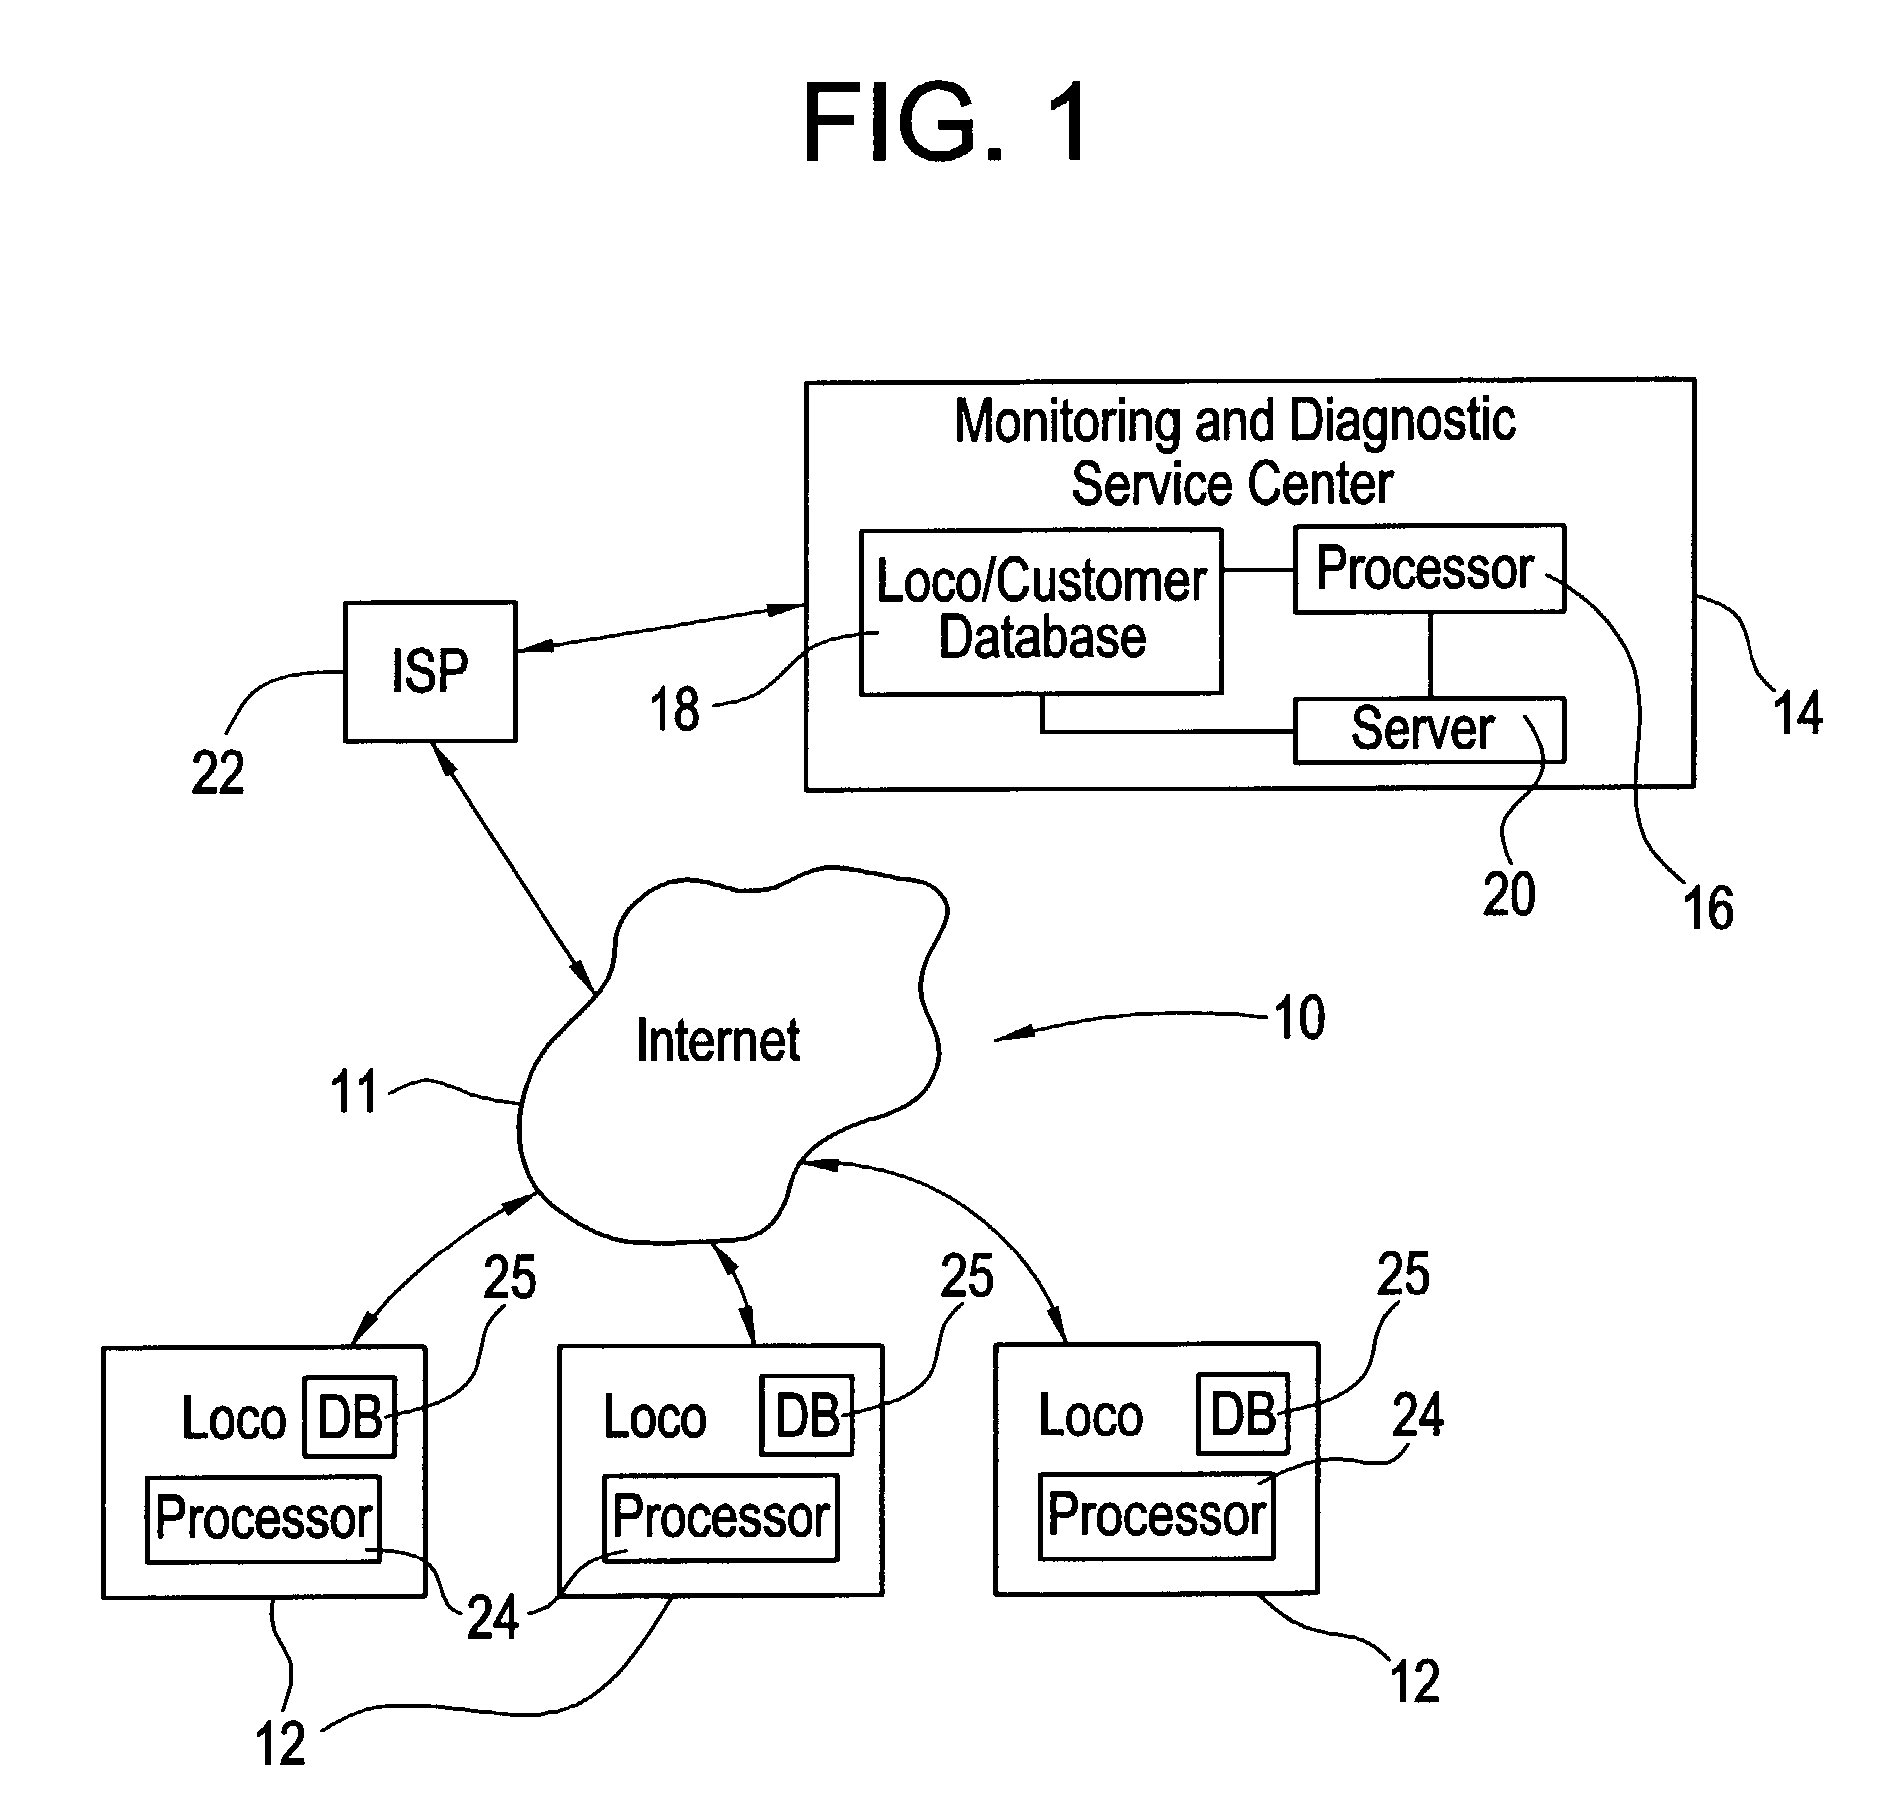 Method and system for monitoring problem resolution of a machine